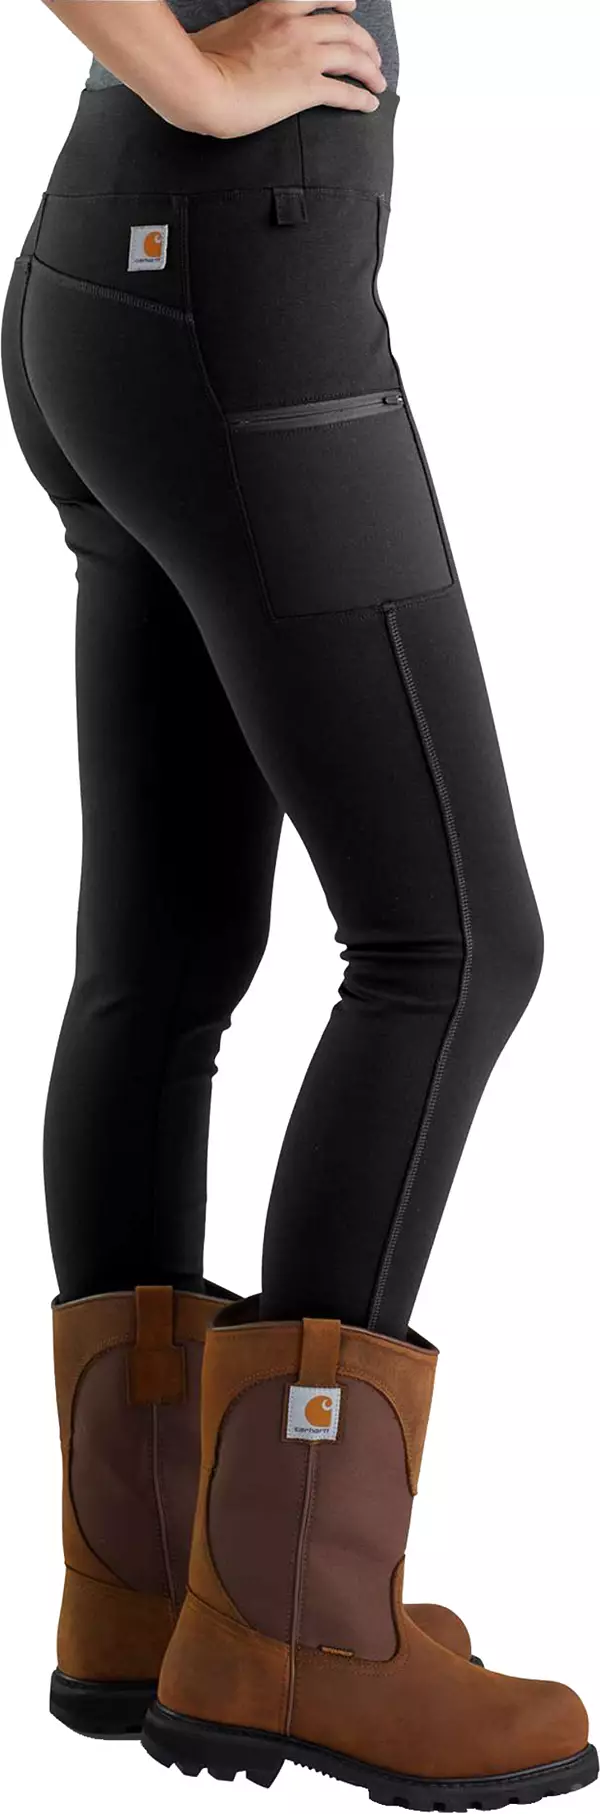 Lightweight Utility Leggings by Carhartt [Review] 